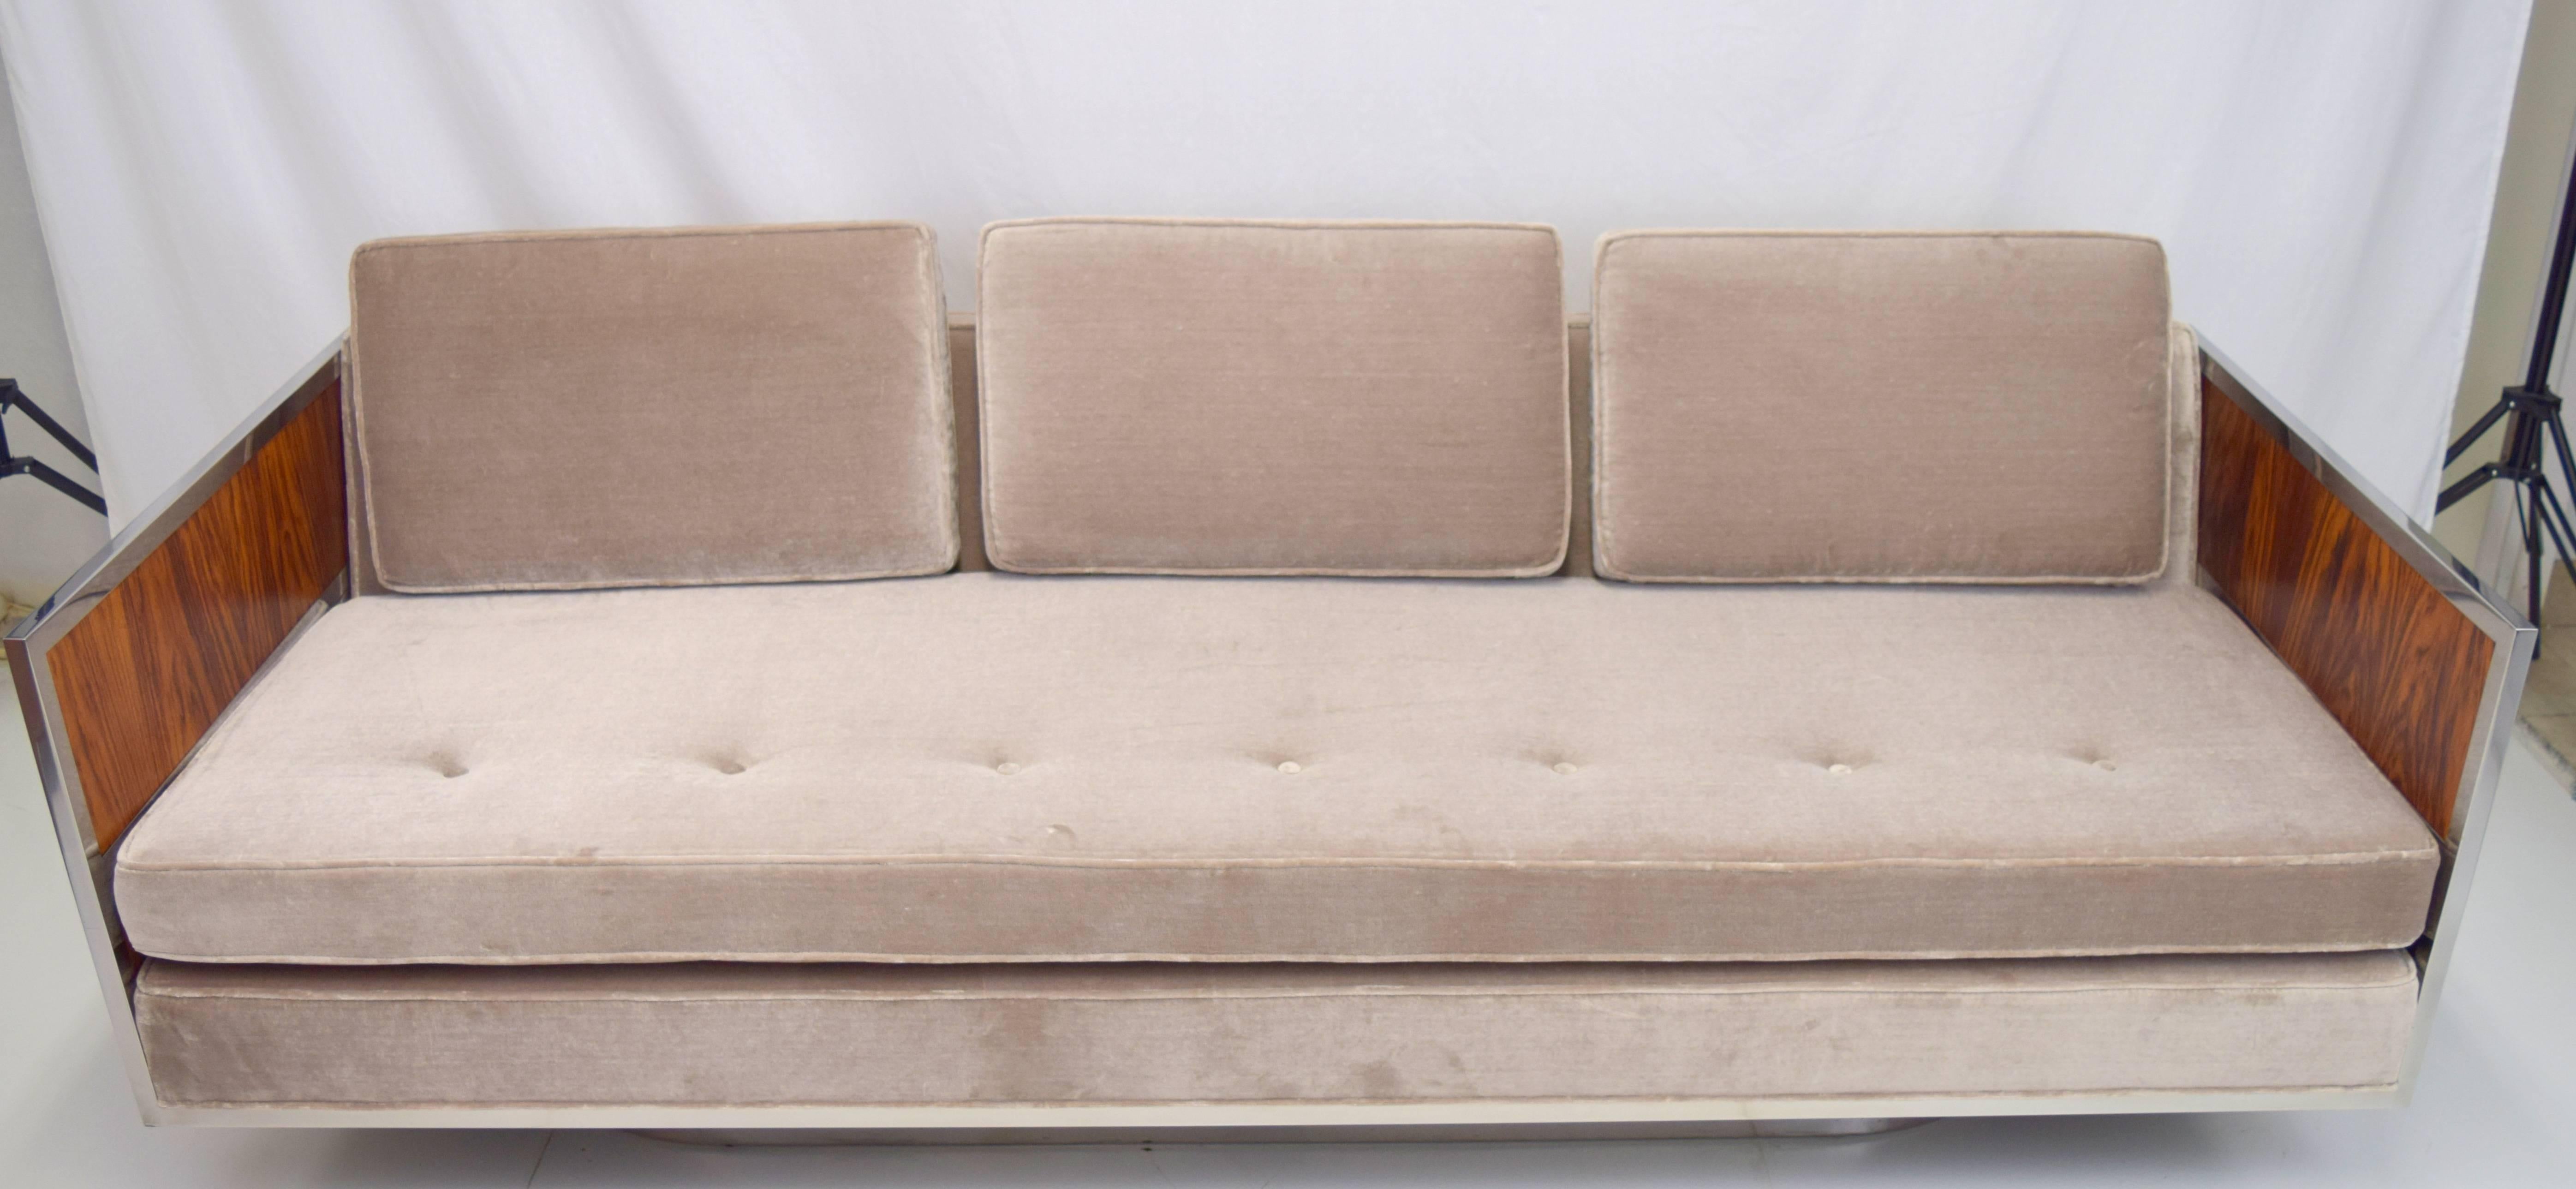 Amazing modernist case sofa attributed to Milo Baughman with rosewood and chrome side panels. Professionally rebuilt and upholstered frame in silver velvet with new cushions and webbing. Sleek oval chrome base and dramatic rosewood grain compliments